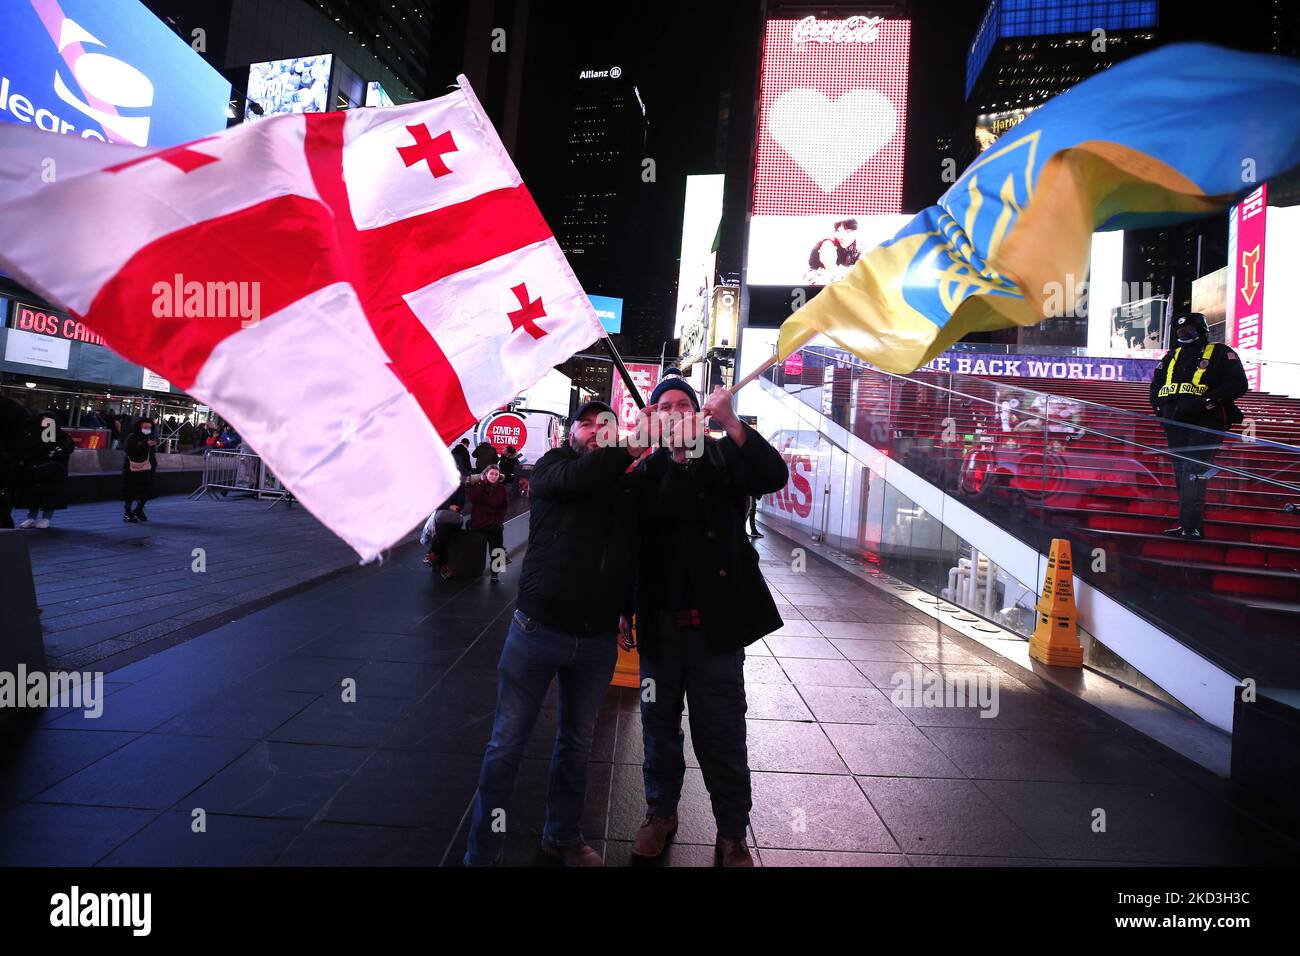 Ukraine supporters rally in Times Square holding flags, signs and chanting slogans on February 25, 2022 in New York City. People form Azerbaijan, Georgia and other indo-euroopean supporters gathered in solidarity against Russian President Vladimir Putin one day after he ordered the invasion of Ukraine. (Photo by John Lamparski/NurPhoto) Stock Photo